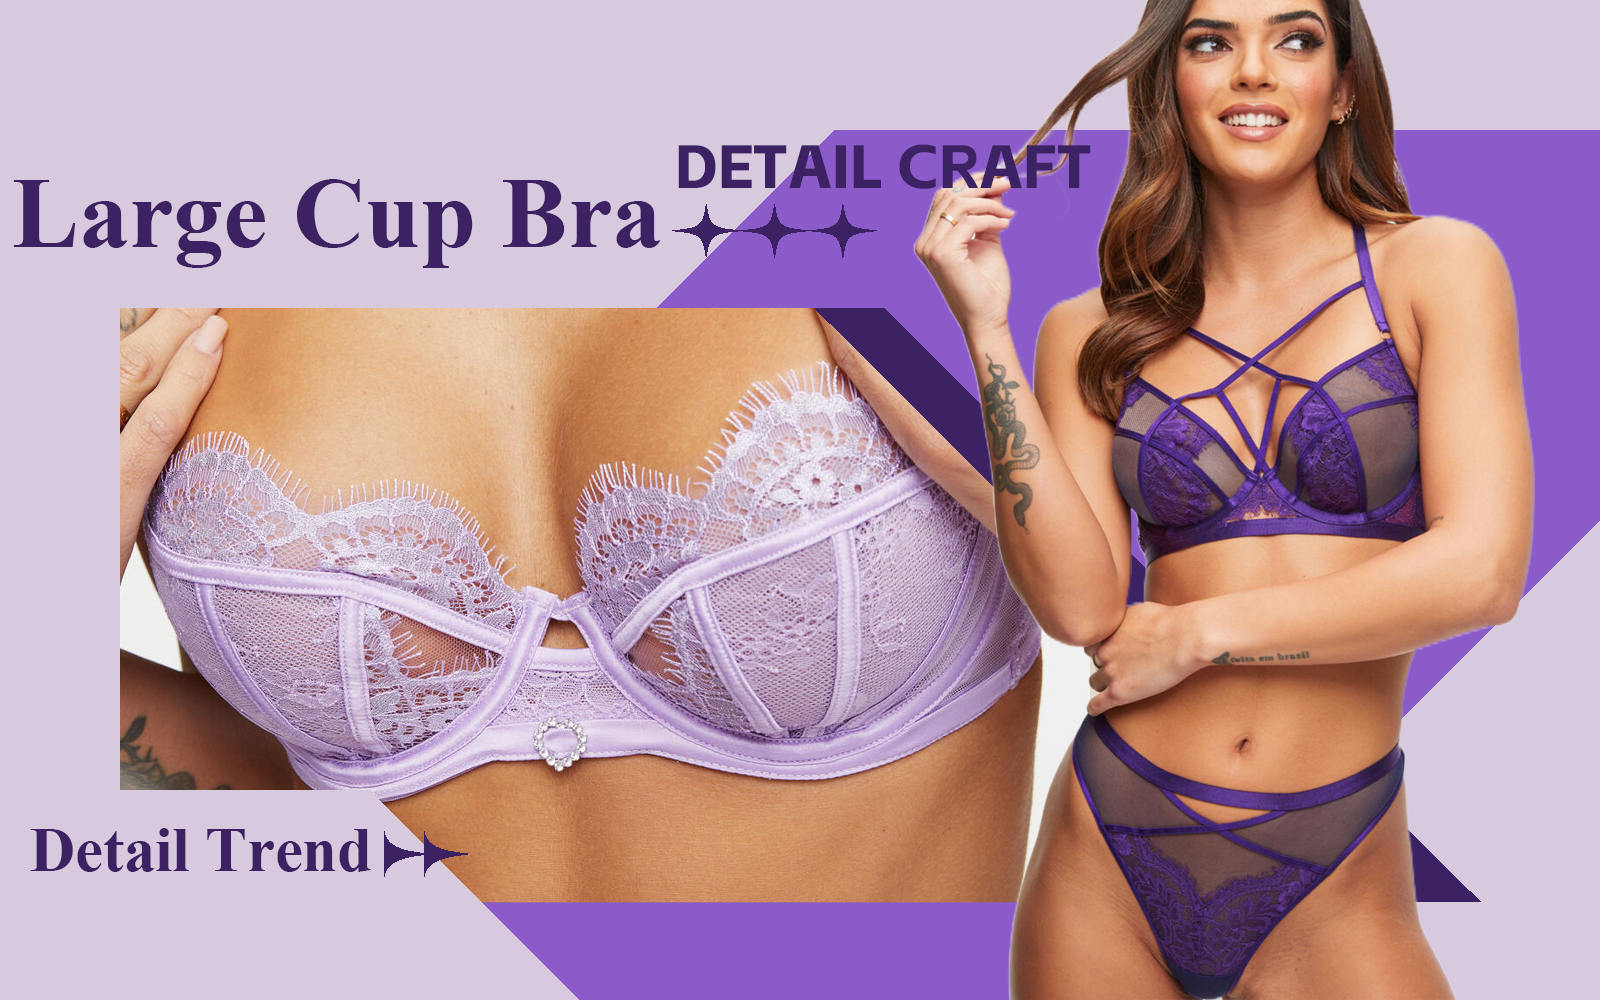 Structural Aesthetics -- The Detail & Craft Trend for Large Cup Bras